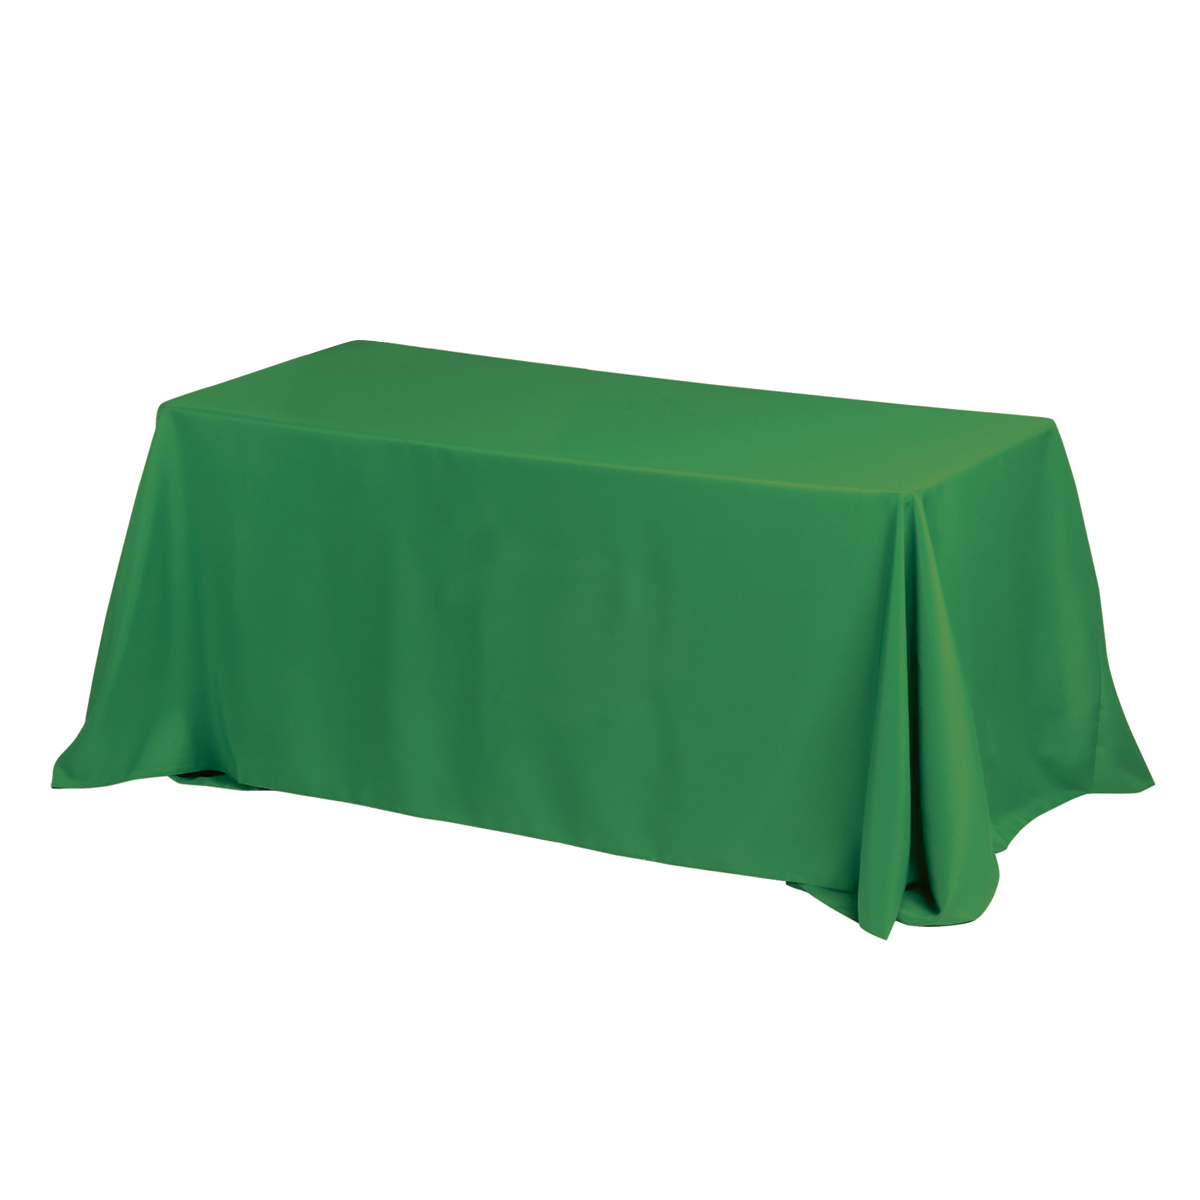 "ZENYATTA EIGHT" 8 ft 4-Sided Throw Style Table Covers & Table Throws -Blanks / Fits 8 ft Table